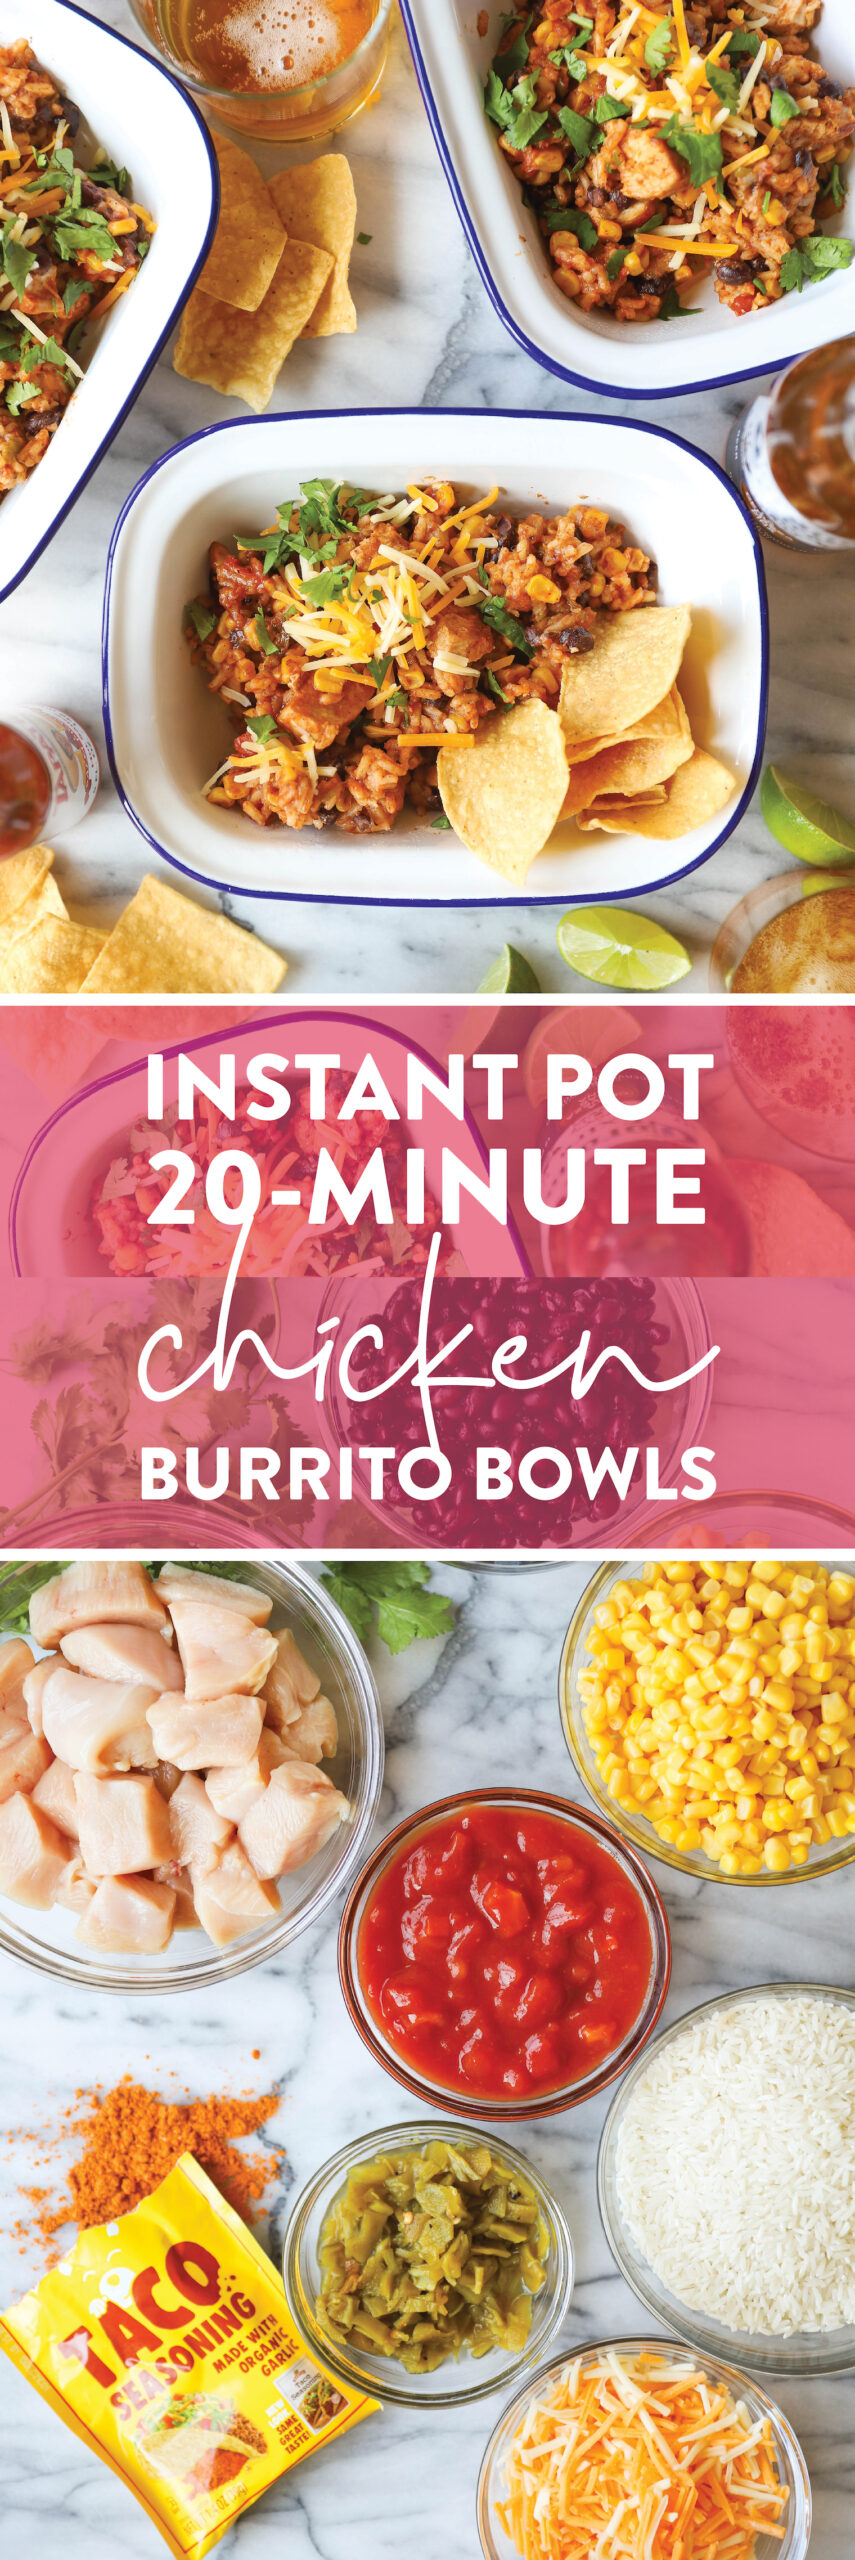 Instant Pot 20 Minute Chicken Burrito Bowls - This literally comes together in less than 10 min prep and another 10 min in the pressure cooker. The chicken is so tender and the flavors are just unbelievable here! After this, you'll never want to make burrito bowls without your Instant Pot!